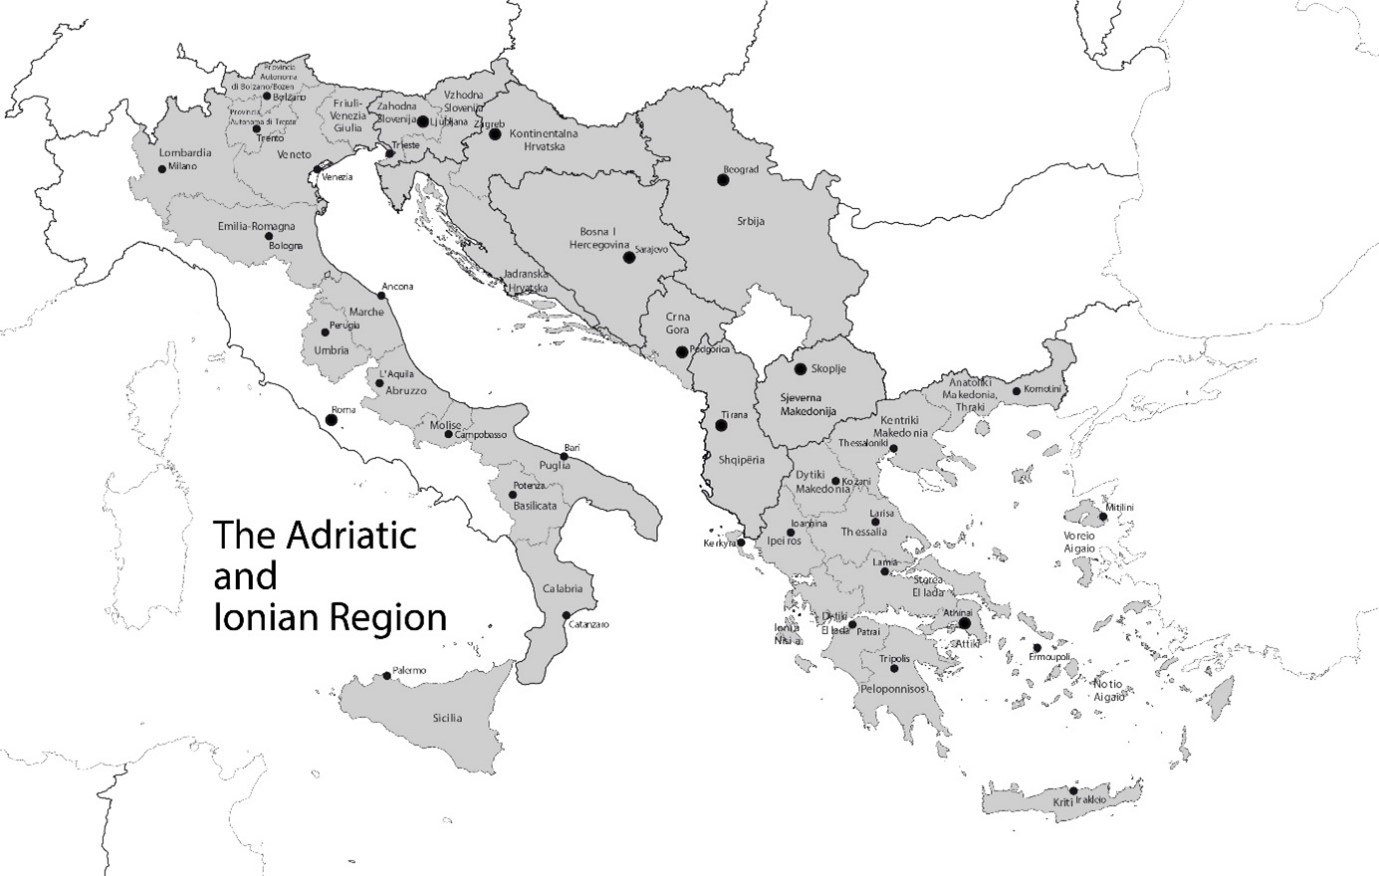 The Adriatic and Ionian Region (AIR)